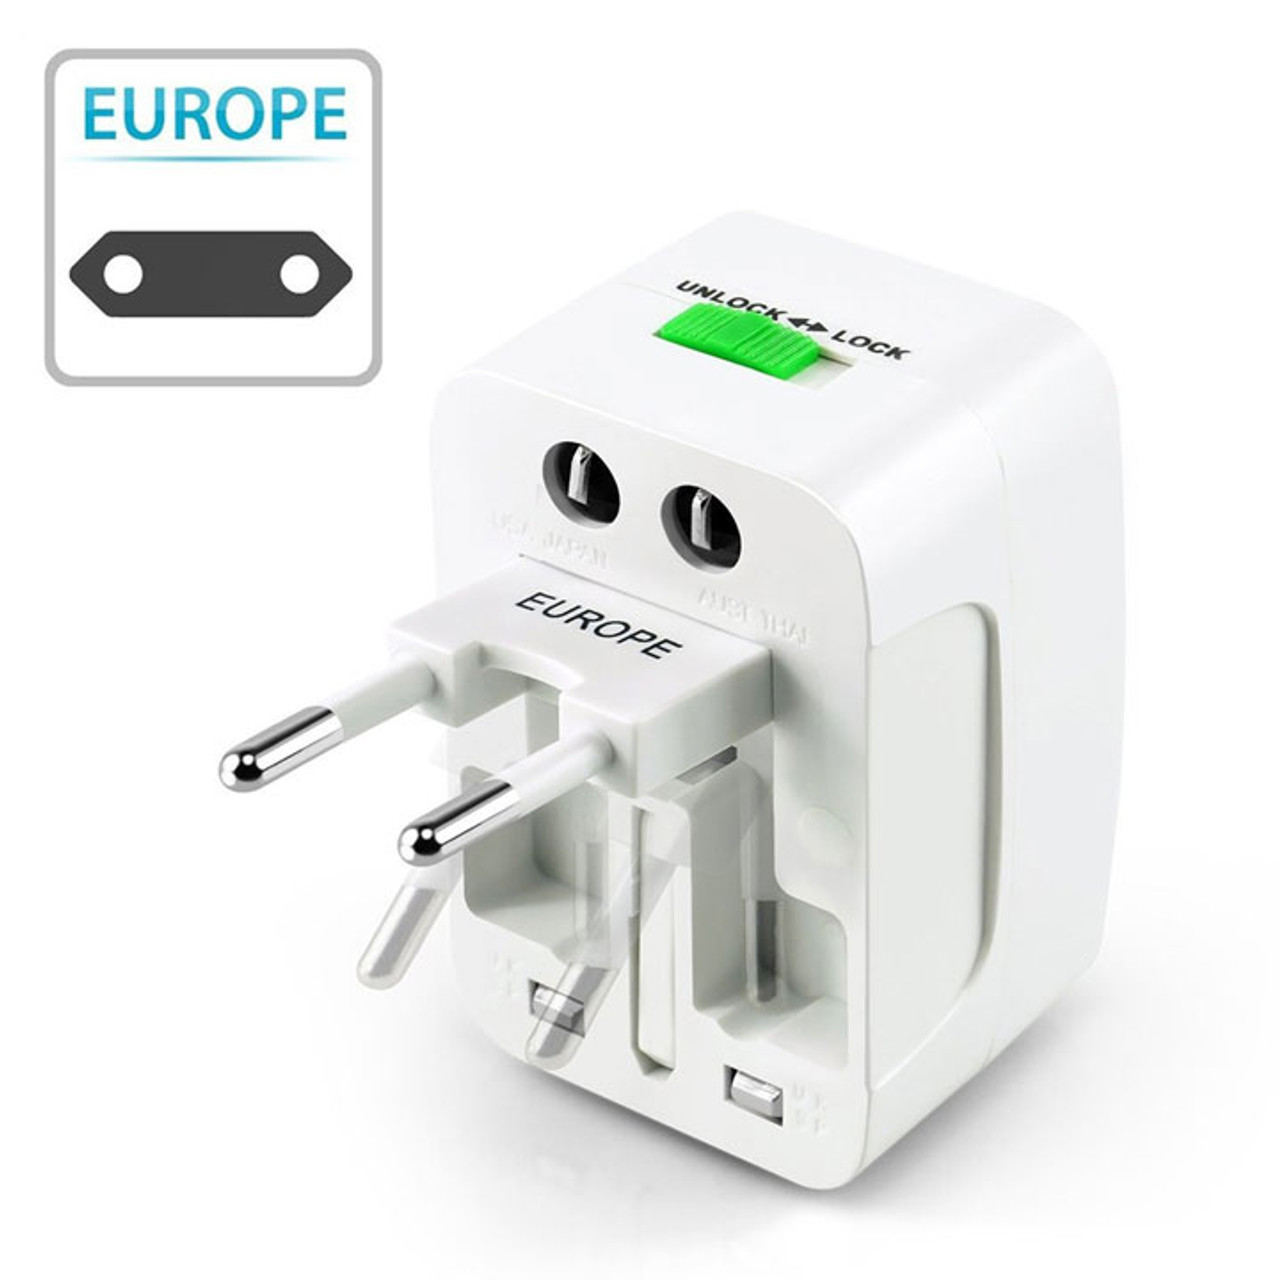 https://cdn11.bigcommerce.com/s-idr2t/images/stencil/1280x1280/products/185/1092/Travel-Power-Adapter-Europe__53879.1526564034.jpg?c=2?imbypass=on